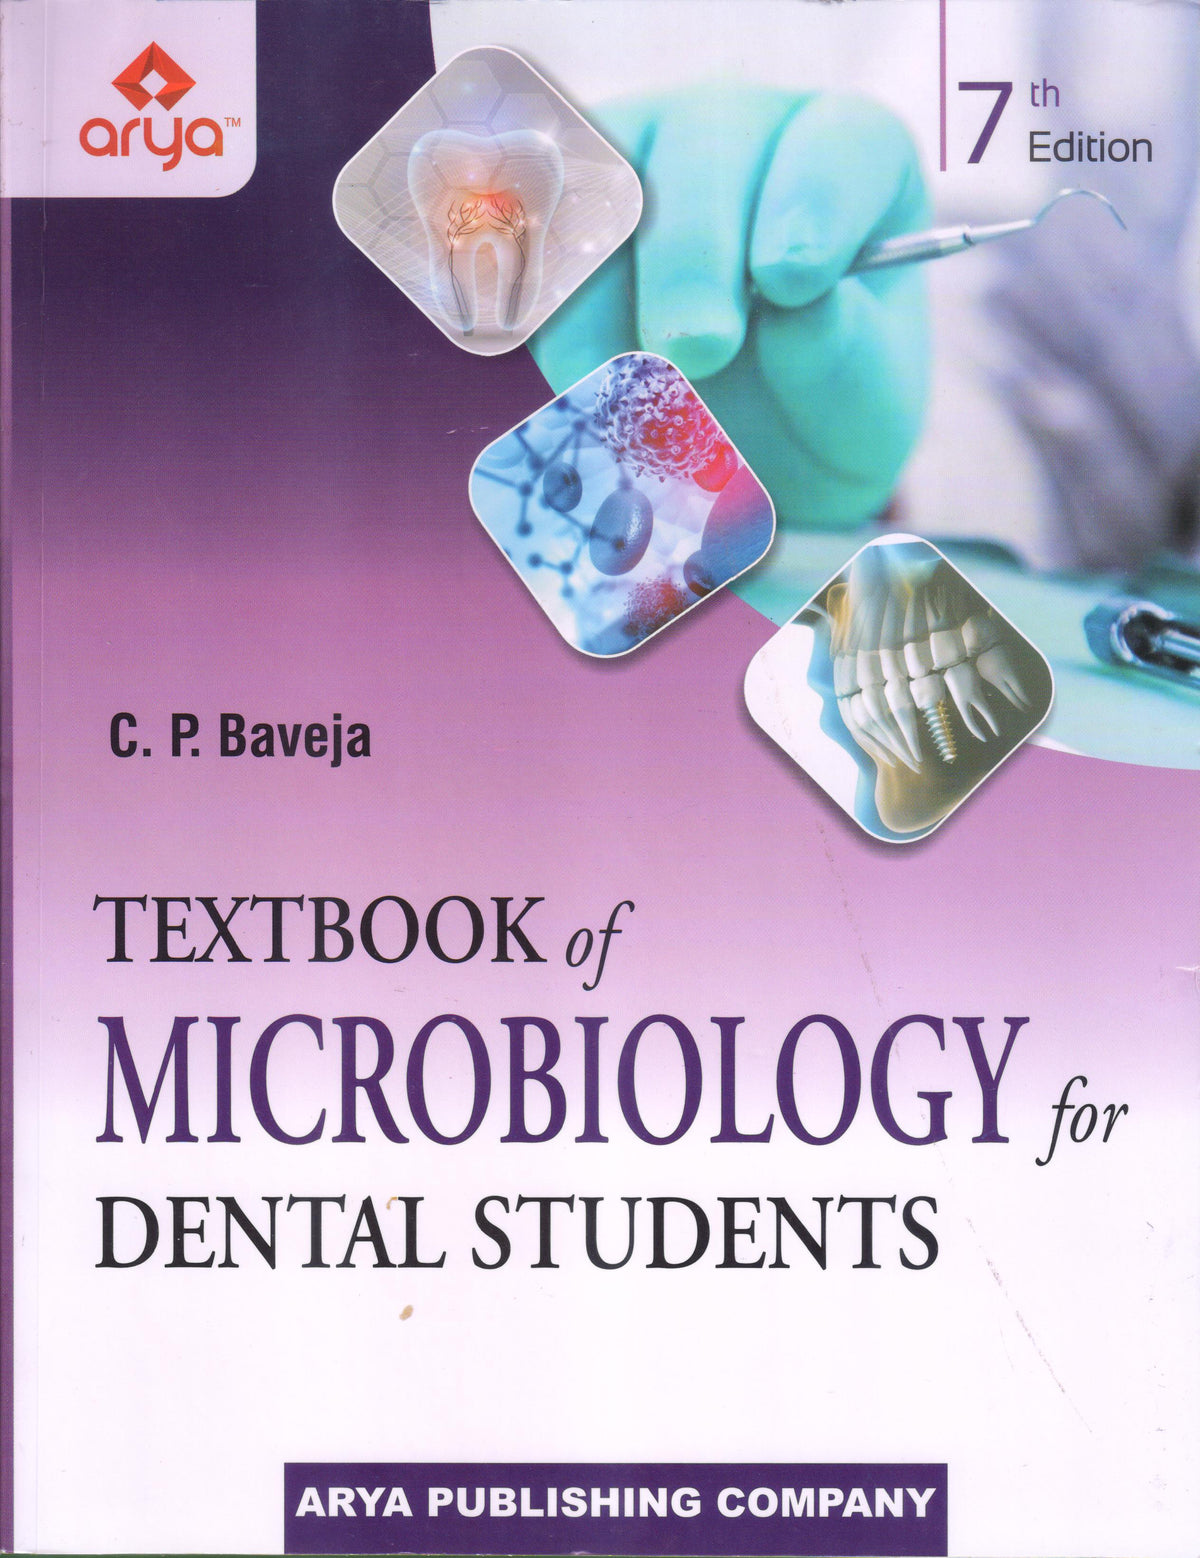 Textbook of Microbiology for Dental Students 7th ed

by C P Baveja